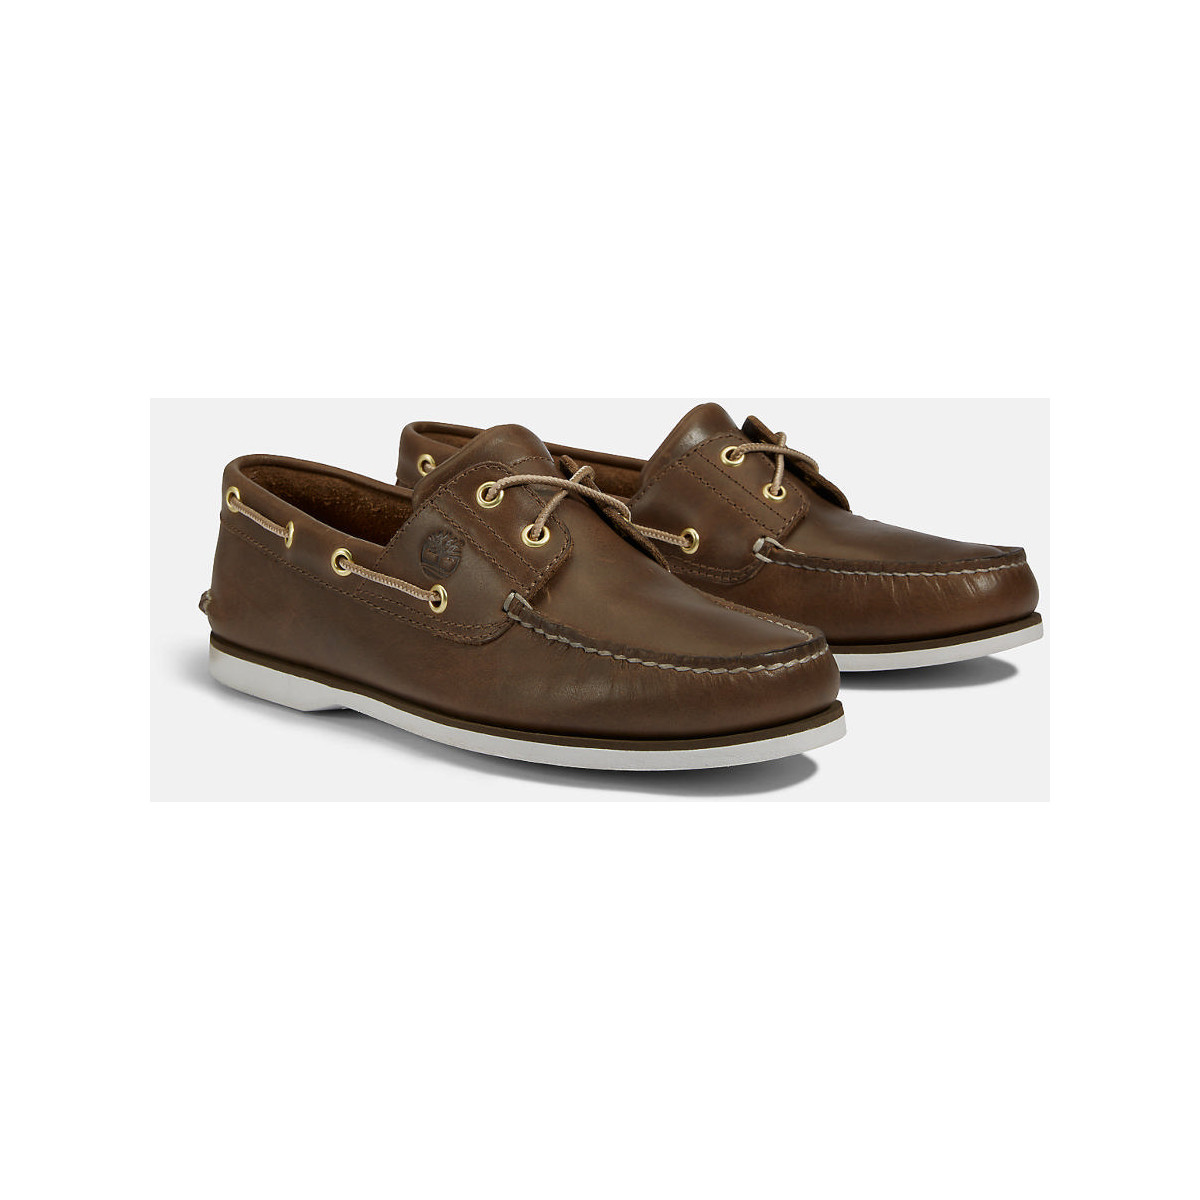 Timberland Classic Boat chaussure bateau homme - marron, pointure 44